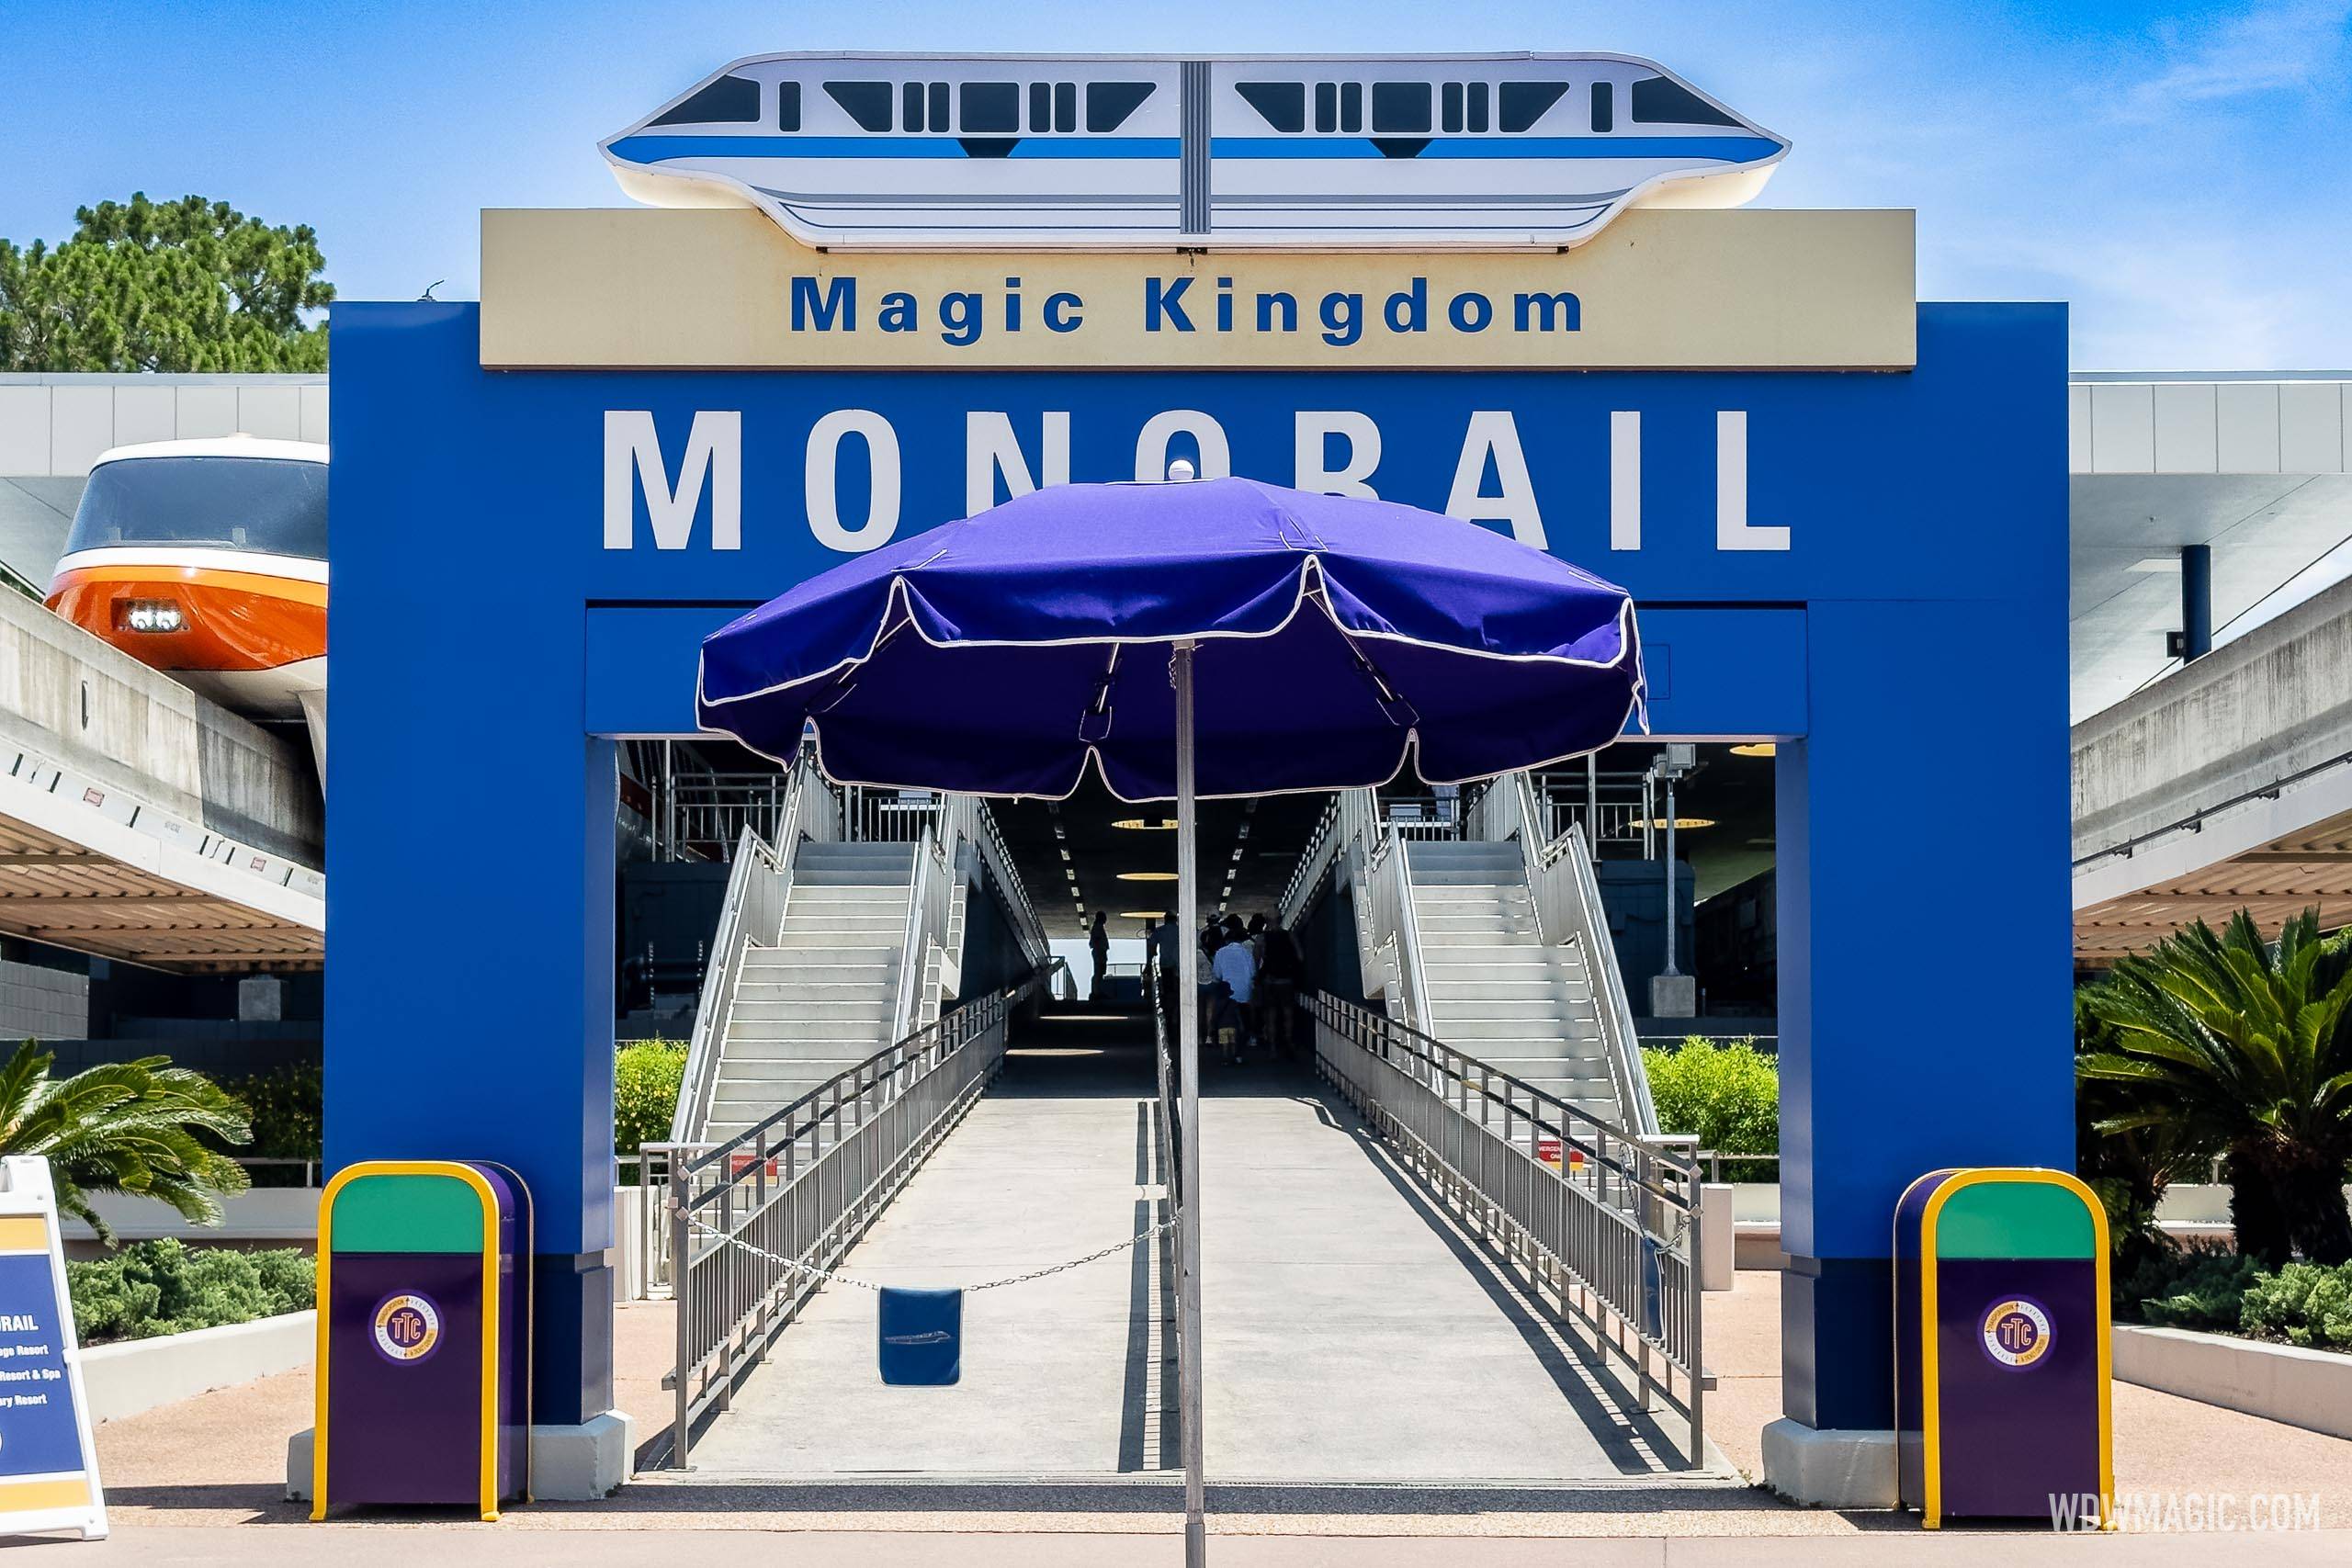 Repaired Monorail entry signage at TTC - July 1 2023